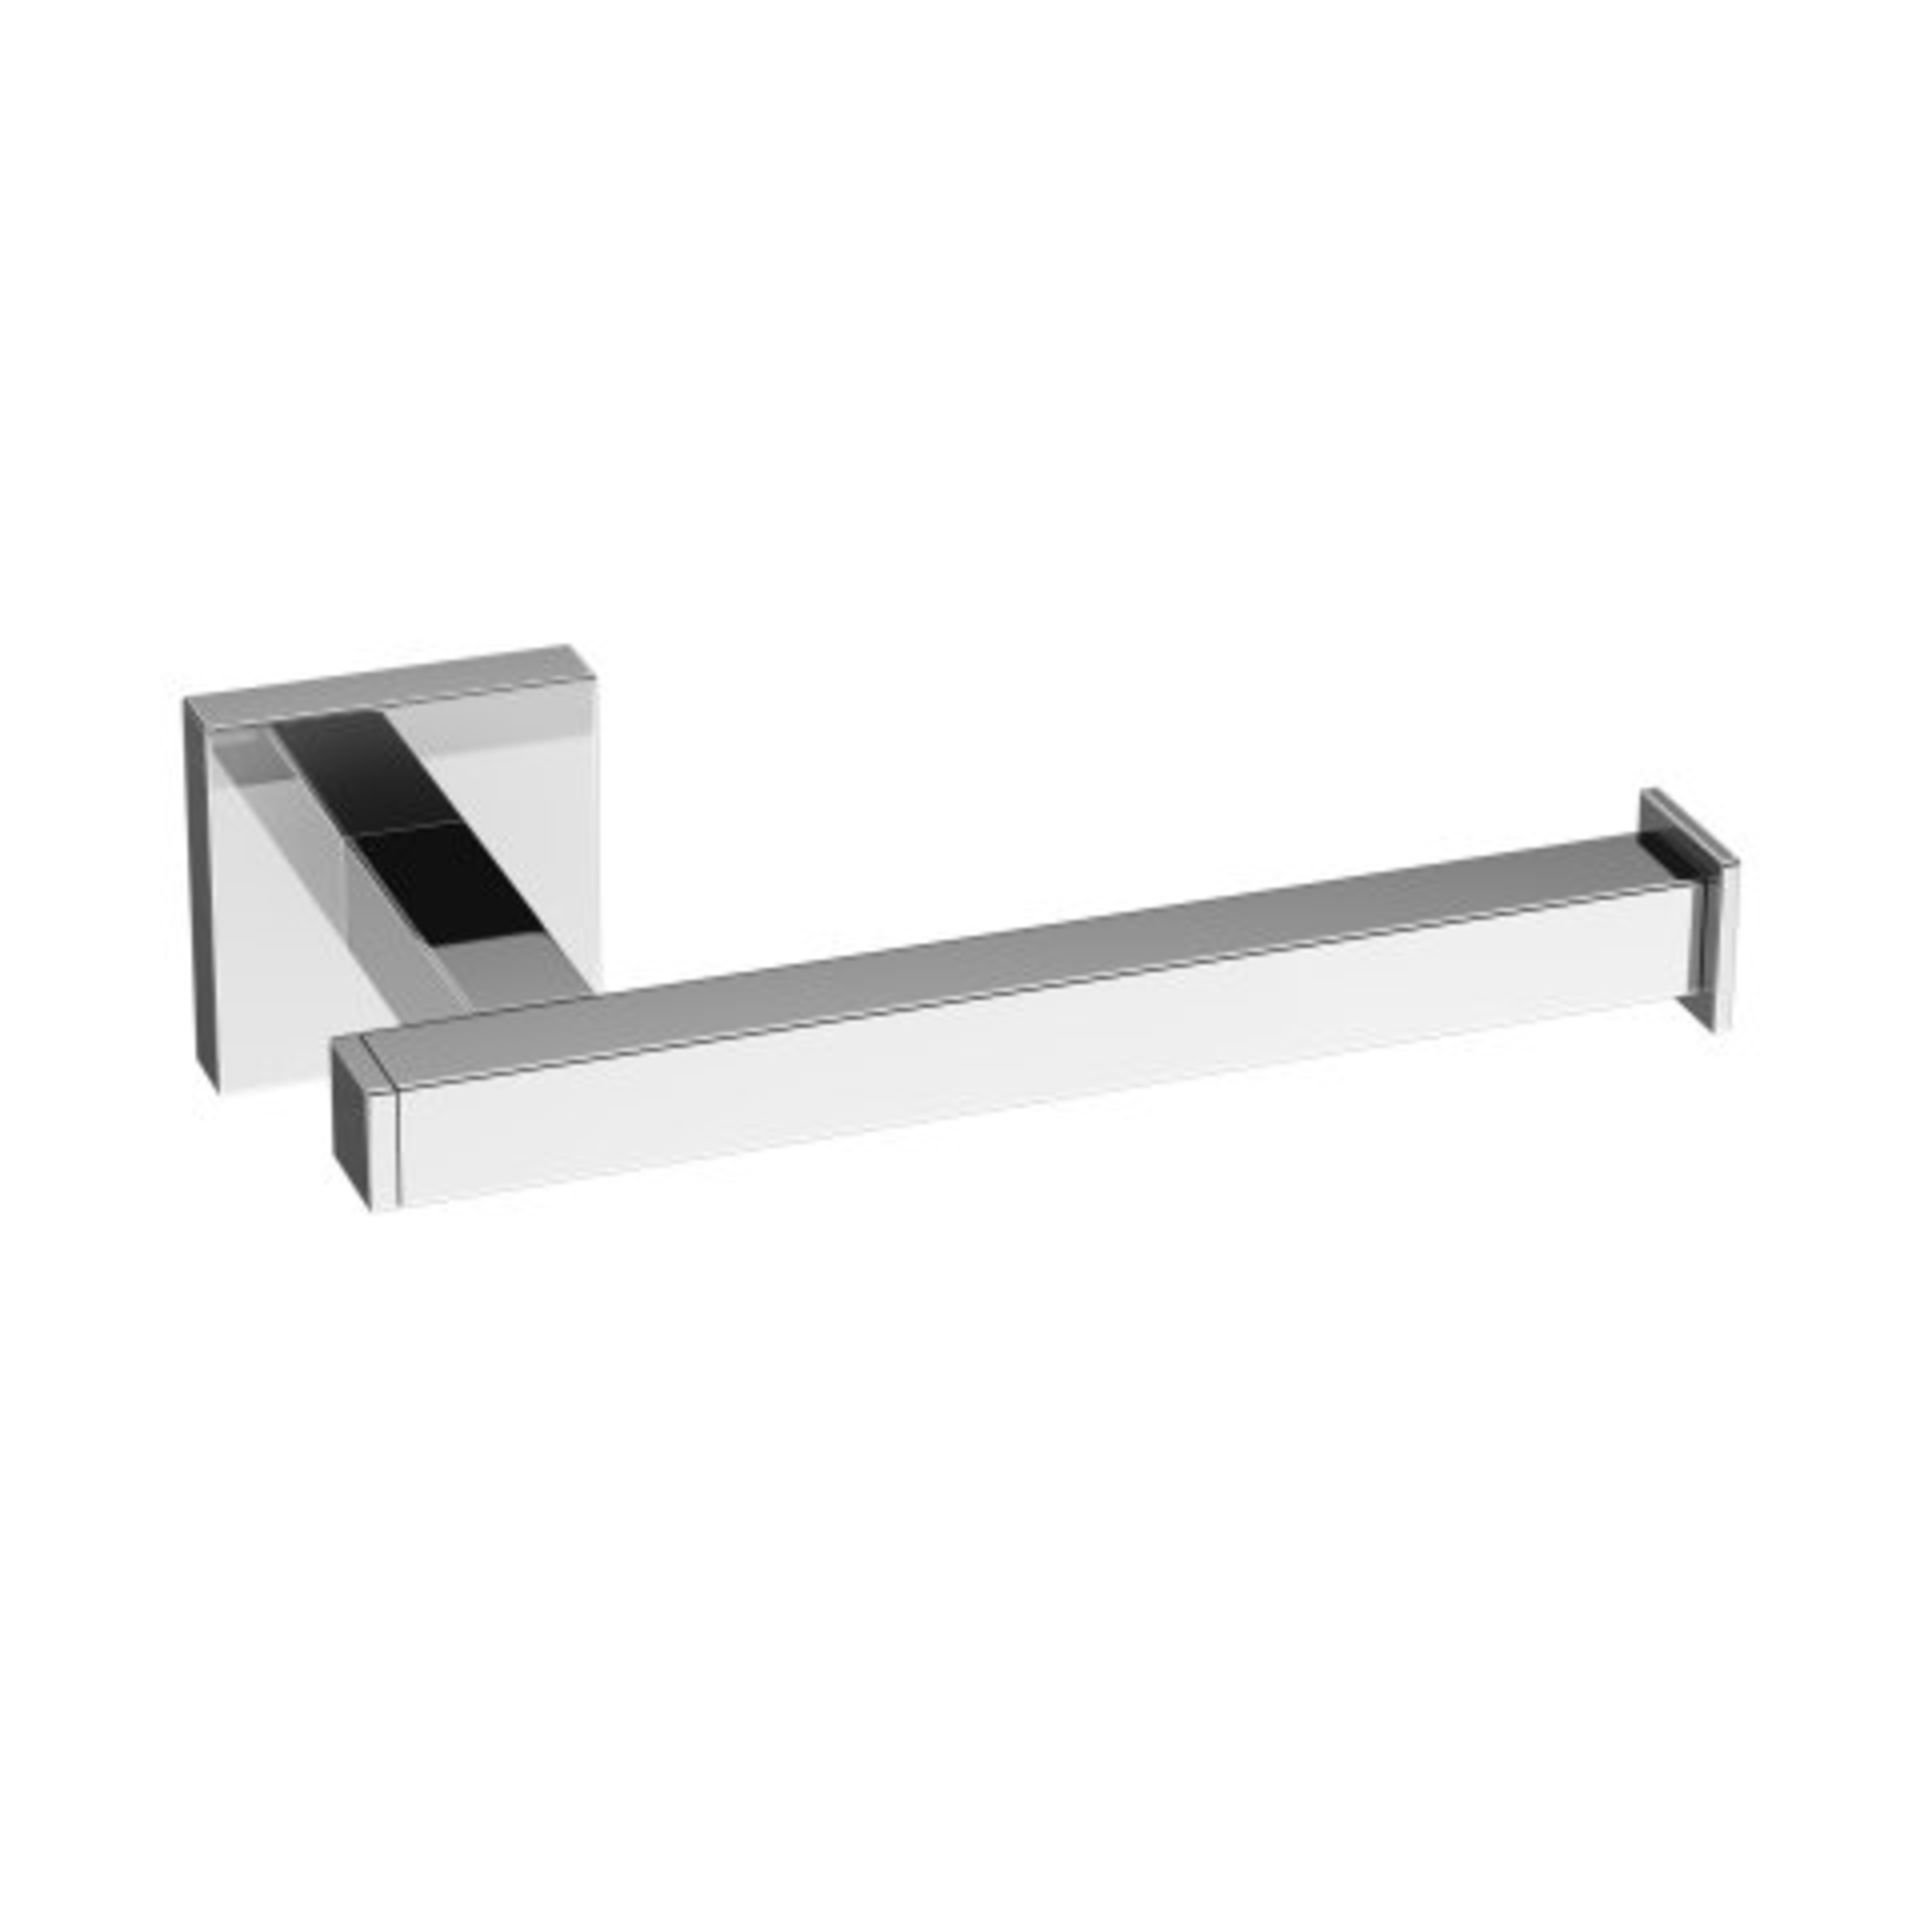 (I21) Jesmond Toilet Roll Holder Made with long lasting corrosion resistant materials this is an - Image 3 of 3